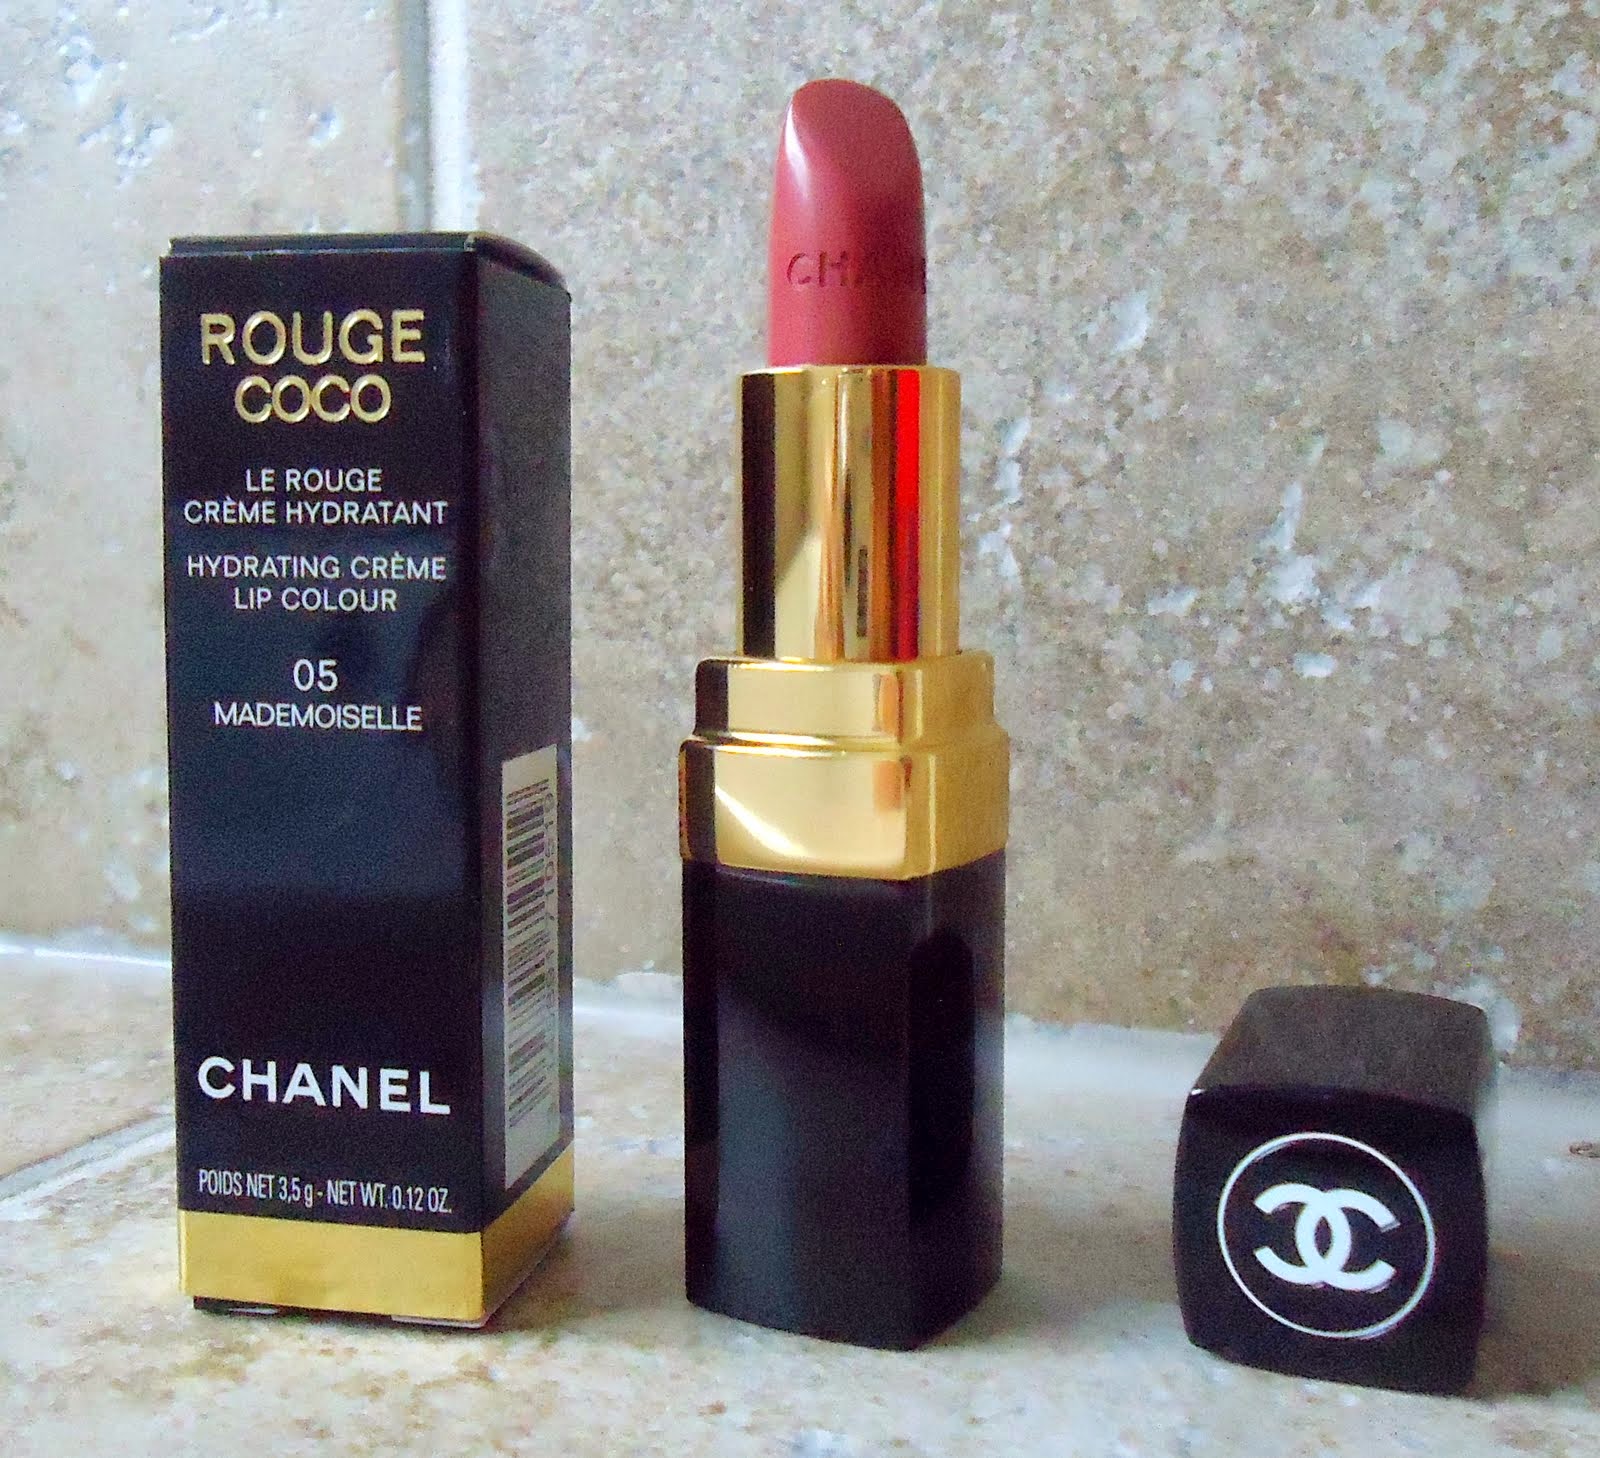 Khan: CHANEL Rouge Coco Hydrating Creme Color in Mademoiselle 05 - Review and Swatches